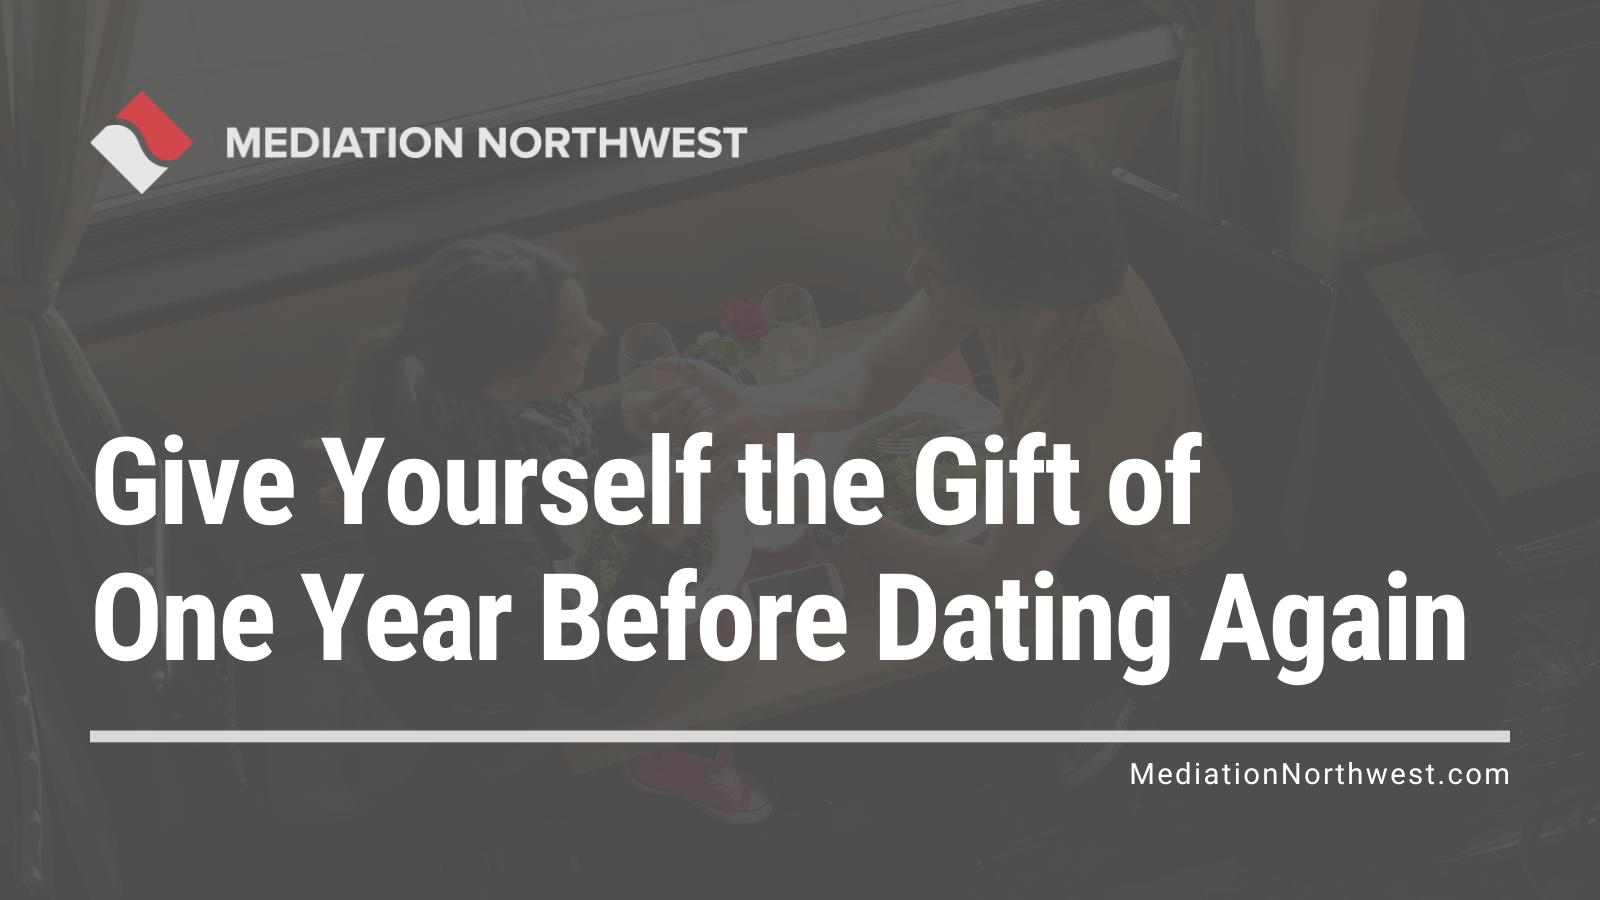 Give Yourself the Gift of One Year Before Dating Again - oregon divorce mediation northwest - julie armbrust